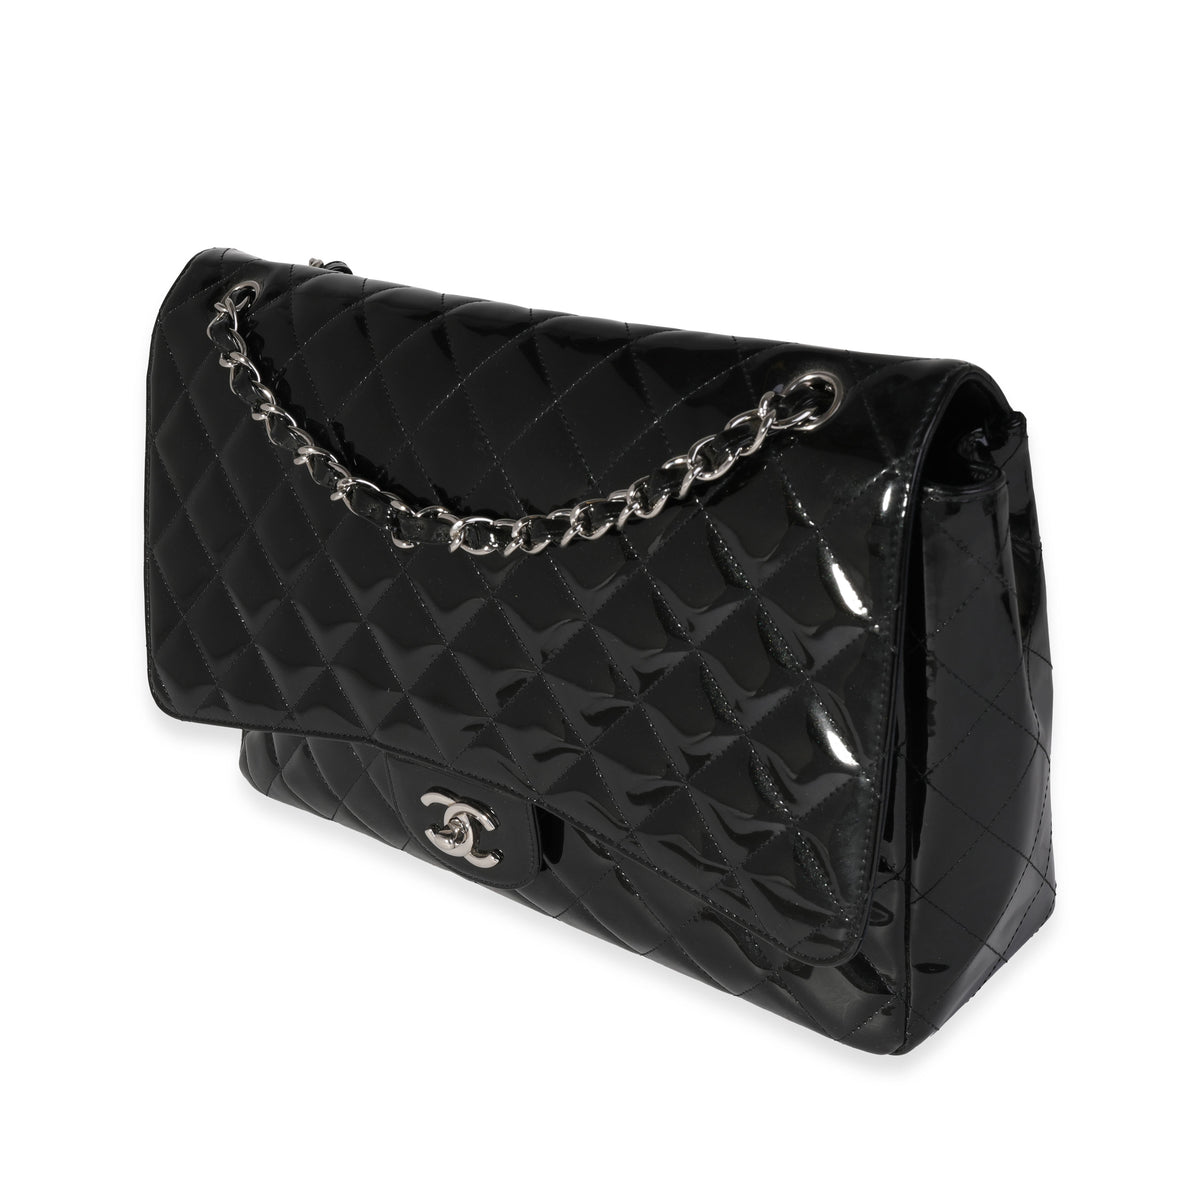 Chanel Black Quilted Patent Leather Maxi Classic Single Flap Bag